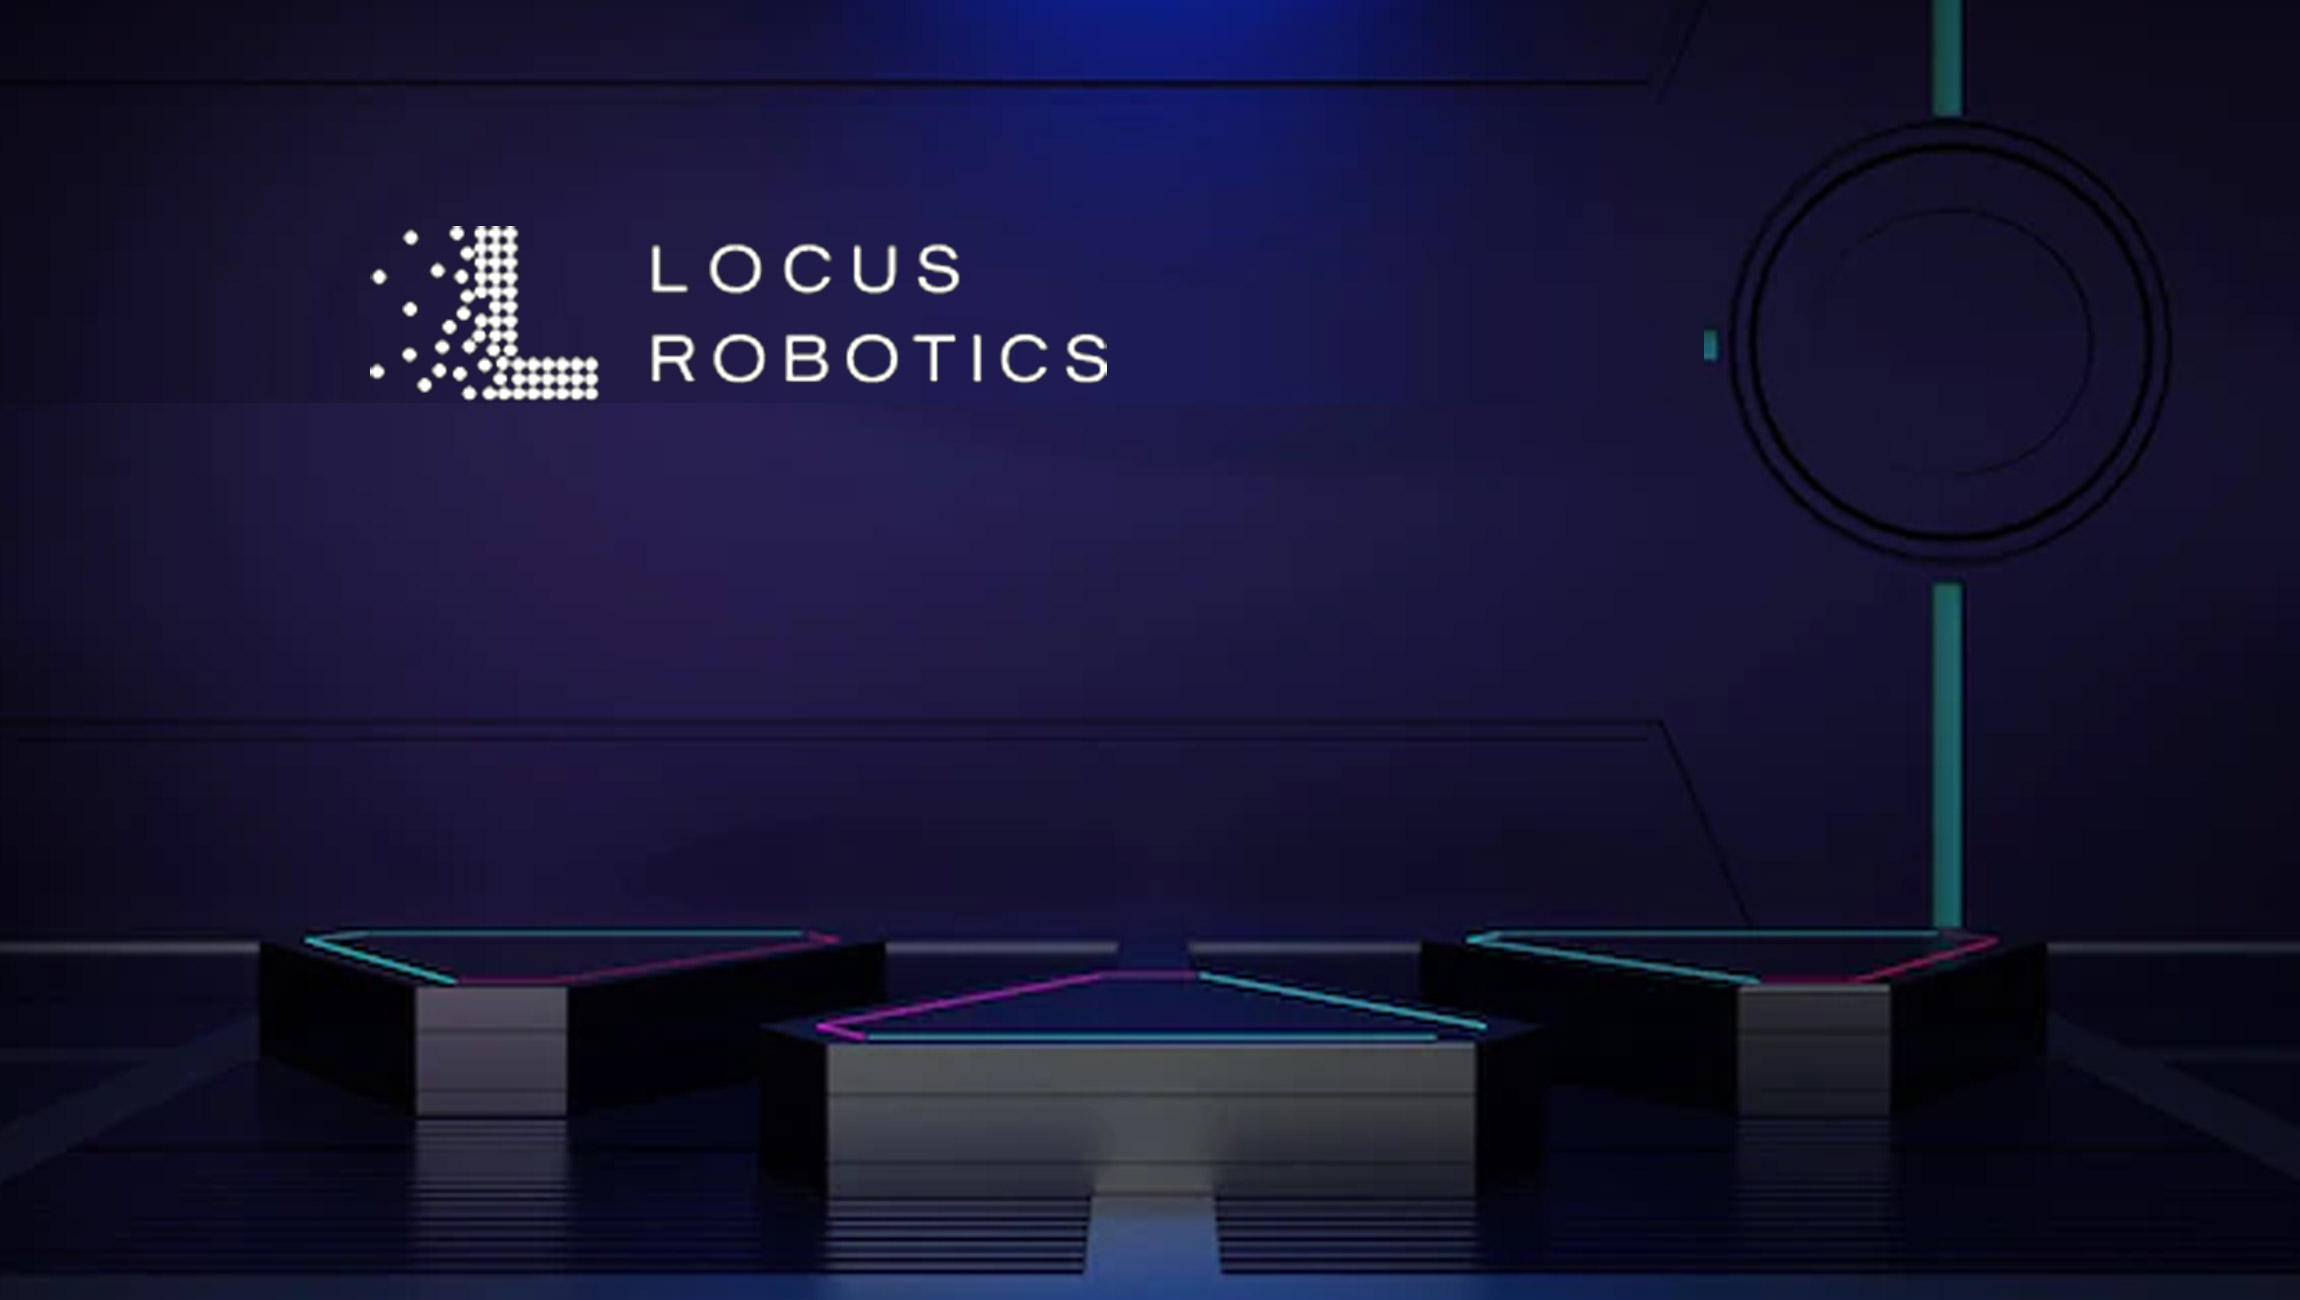 IFOY Nominee Locus Robotics Continues Successful Expansion and Introduces New AMRs To Its Intelligent Warehouse Execution Platform for End-To-End Optimization